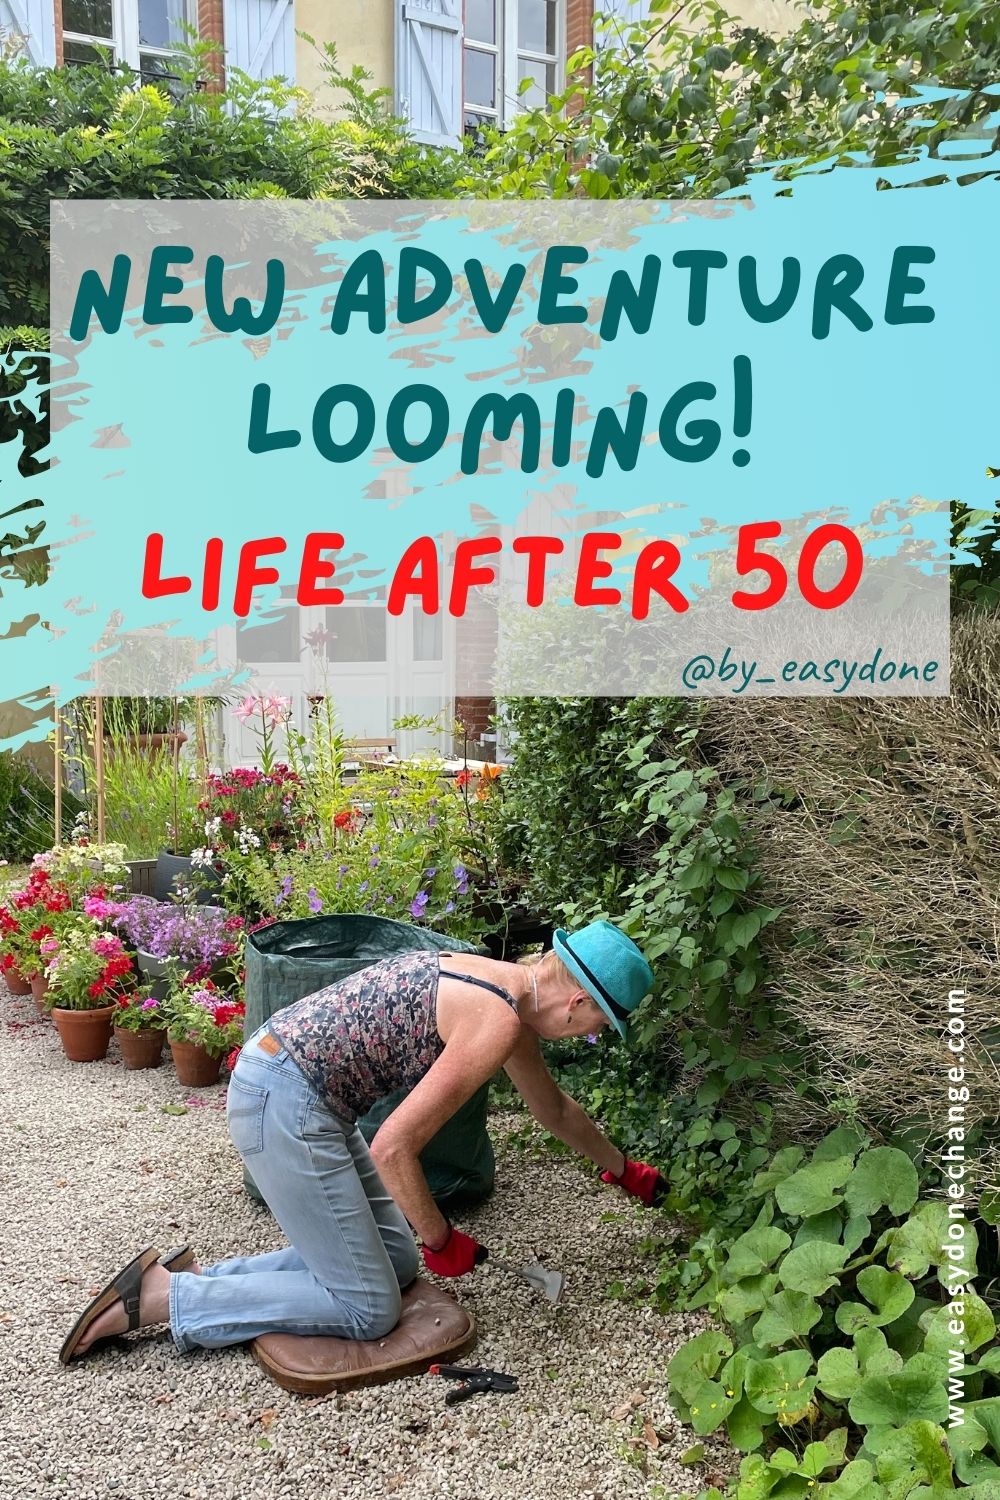 life after 50, new adventure, lifestyle change